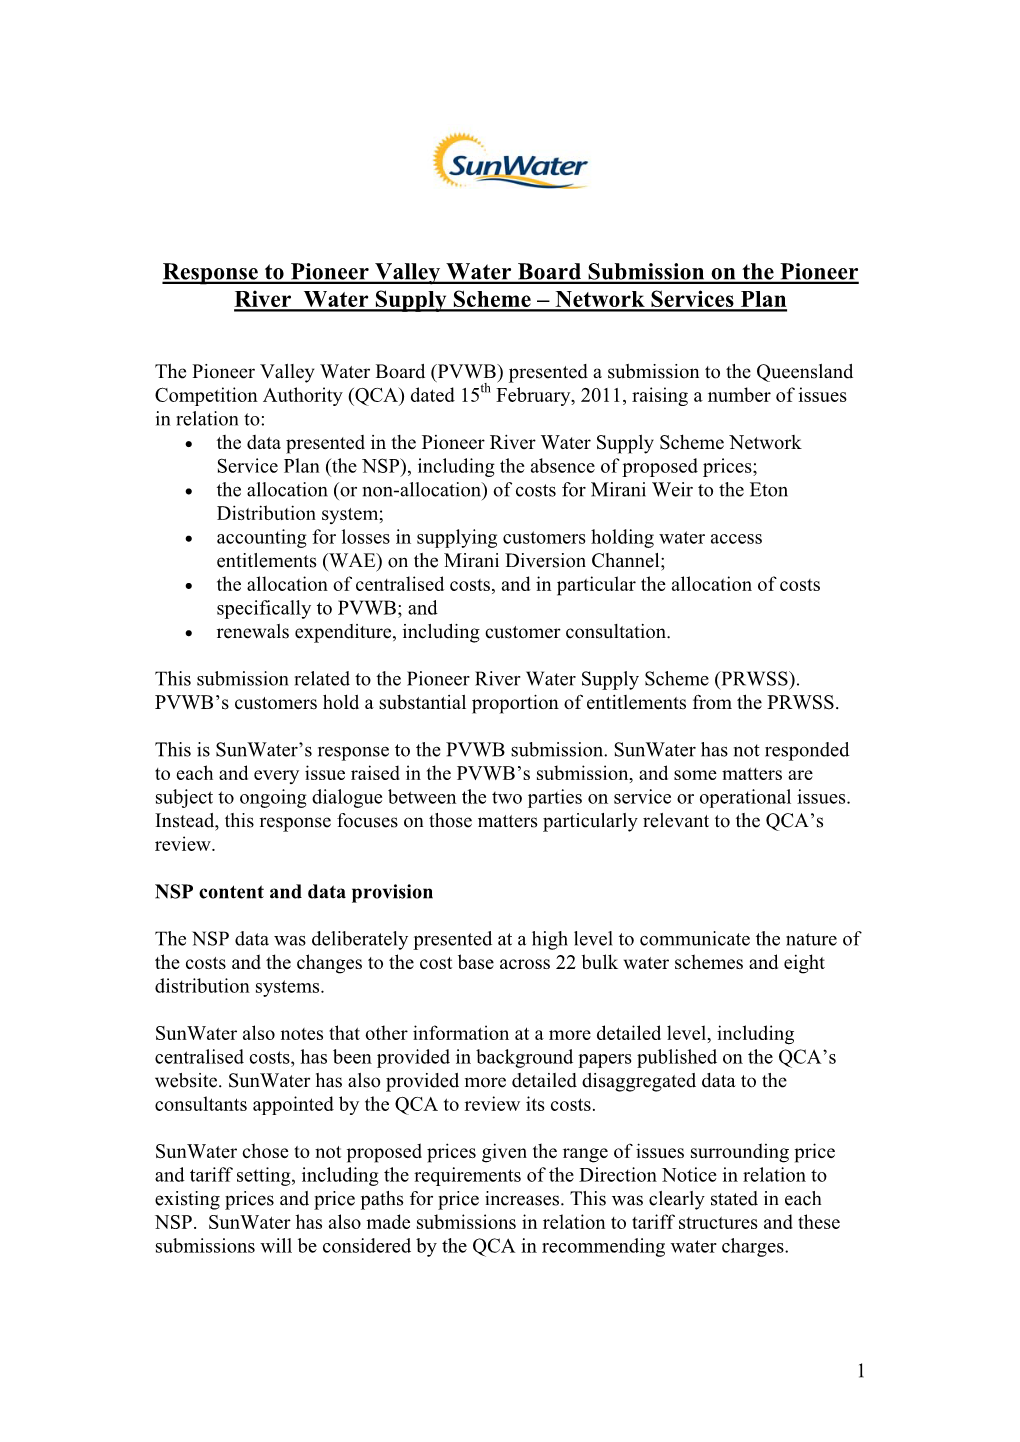 Response to Pioneer Valley Water Board Submission on the Pioneer River Water Supply Scheme – Network Services Plan